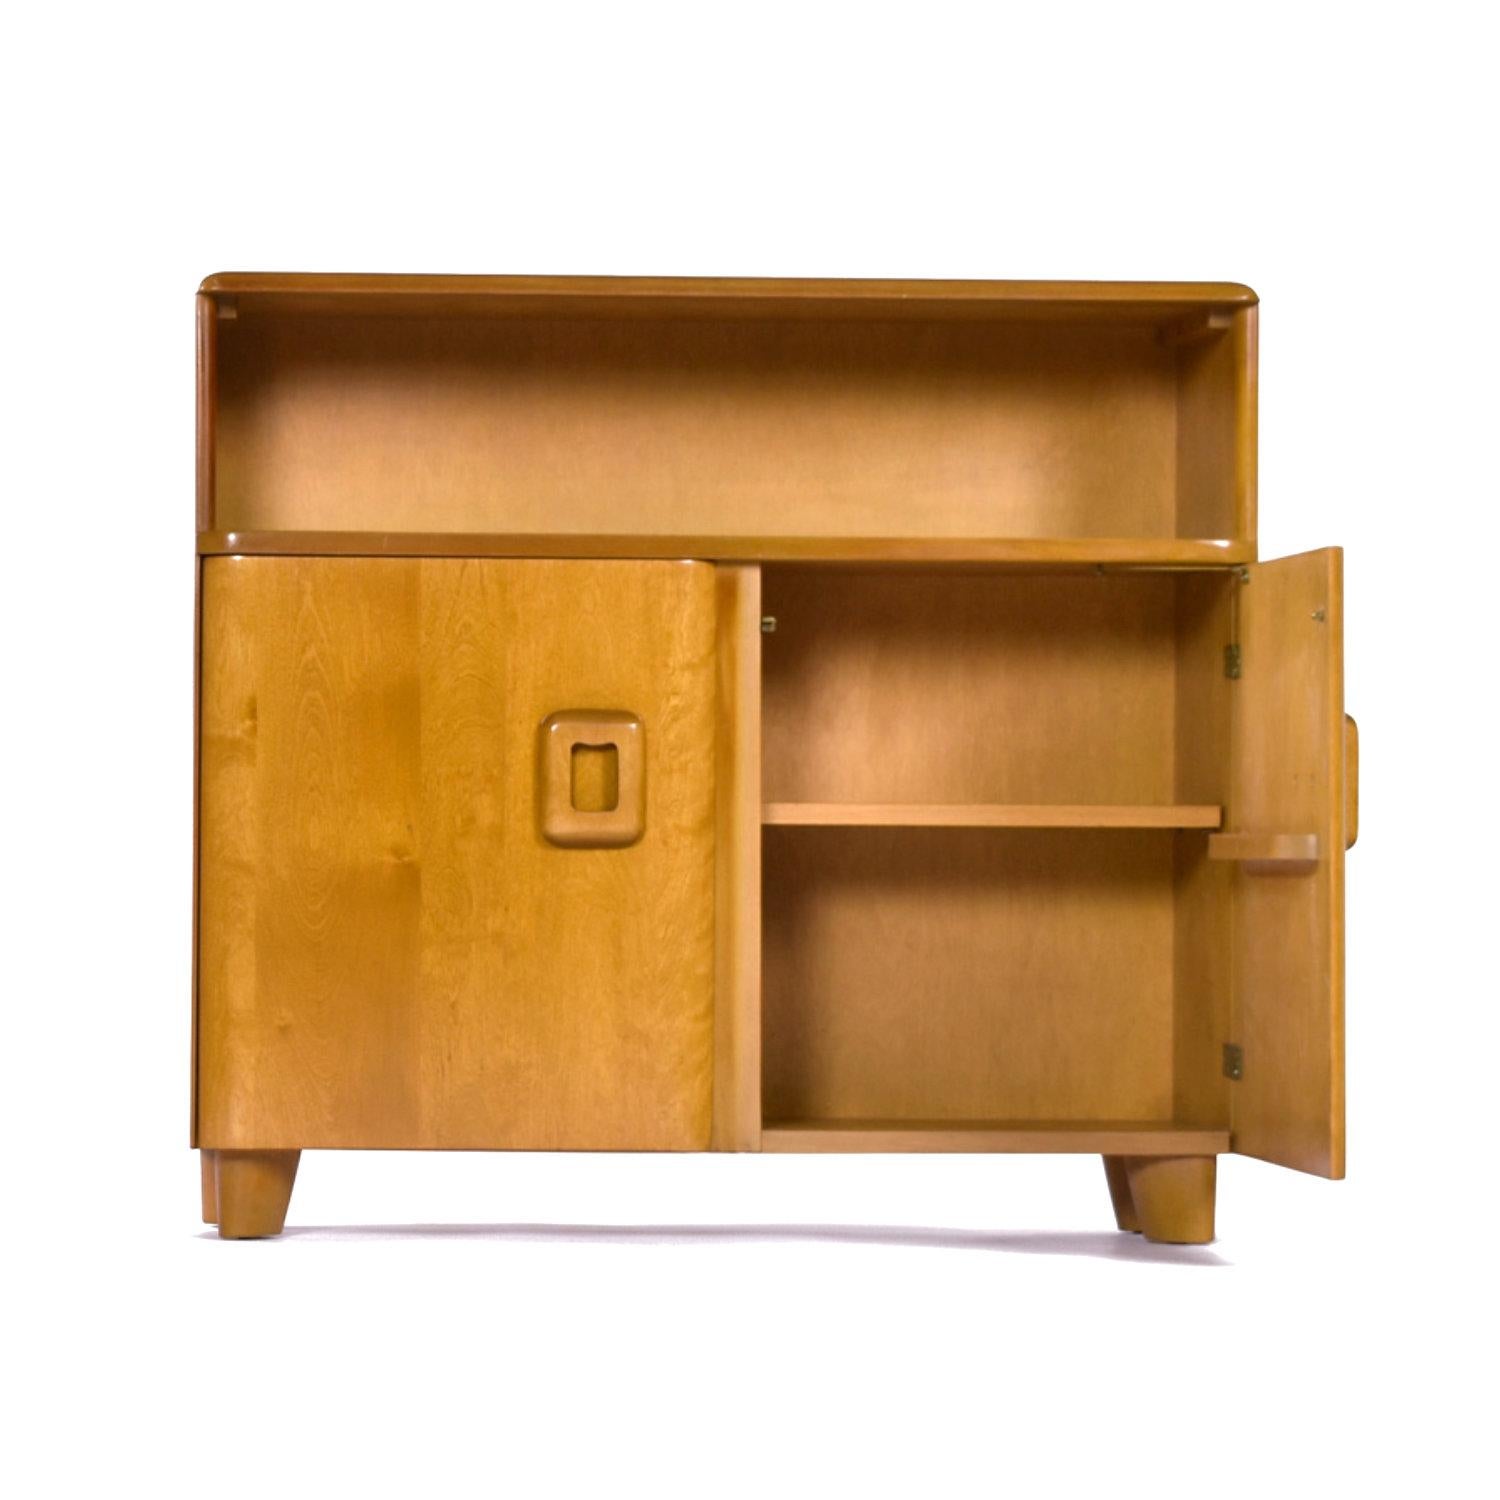 Mid-20th Century Restored Heywood Wakefield Wheat Finish M326 Cabinet Bookcase For Sale